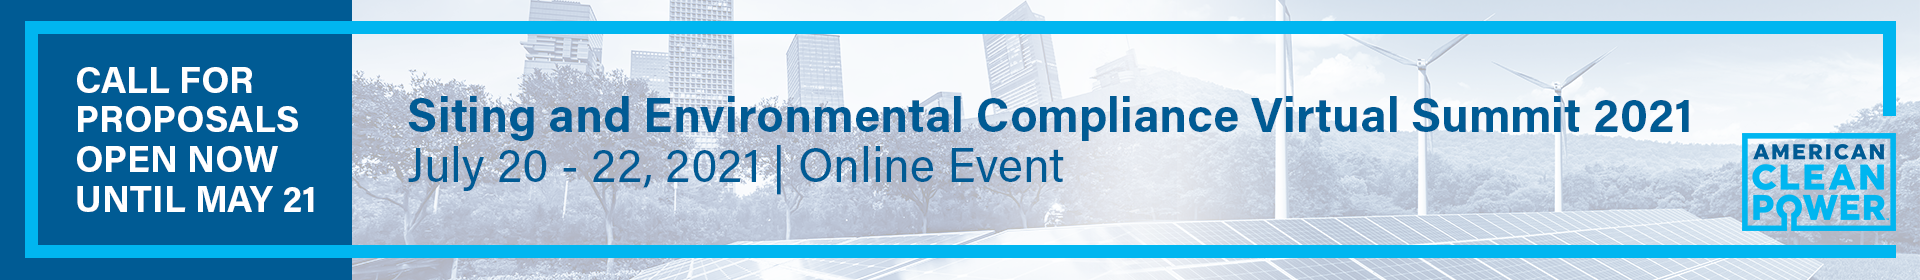 Siting and Environmental Compliance Virtual Summit 2021 Event Banner